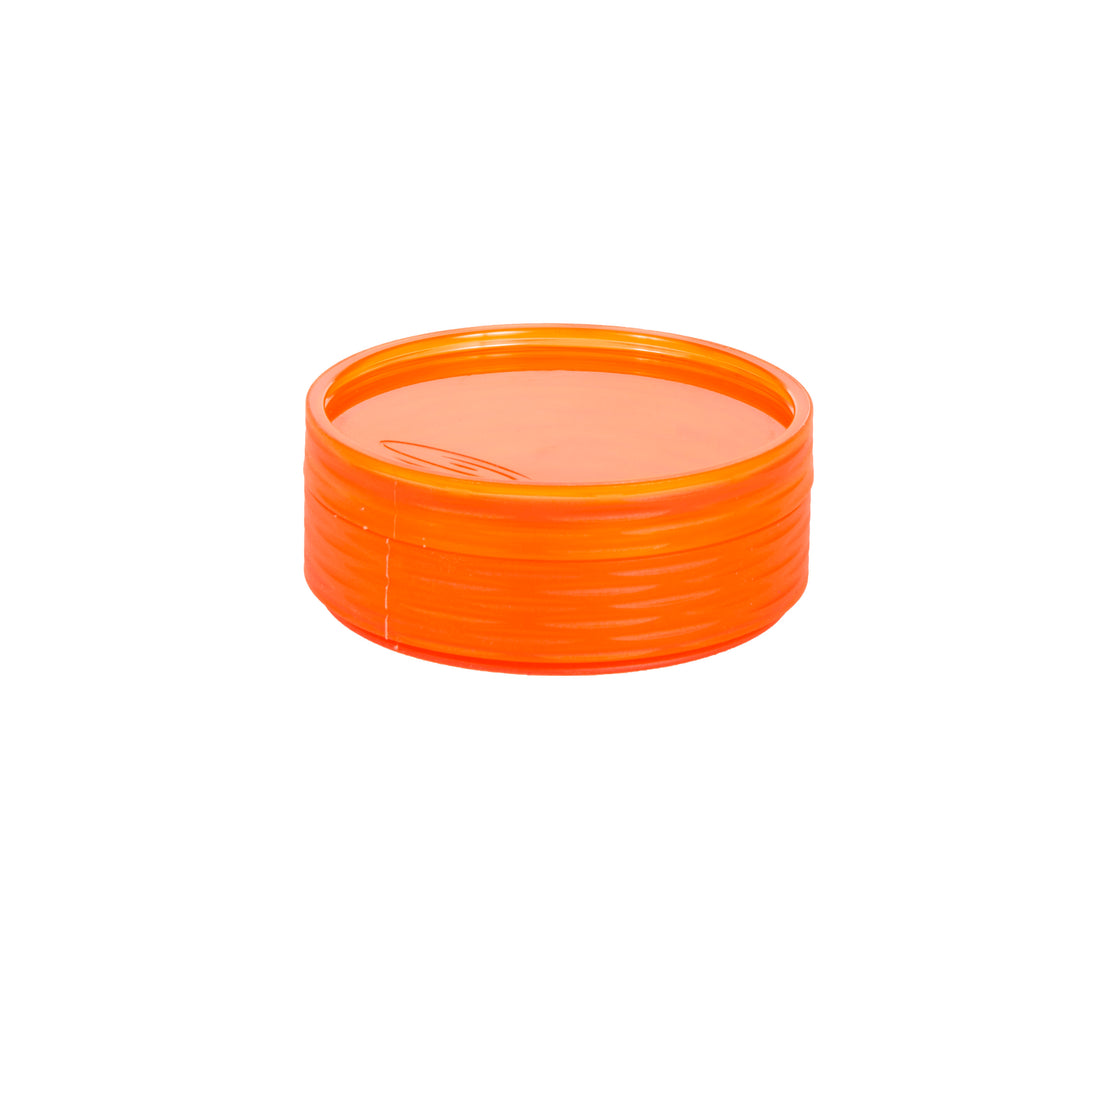 Fishpond Fly Puck - ( FISHPOND)